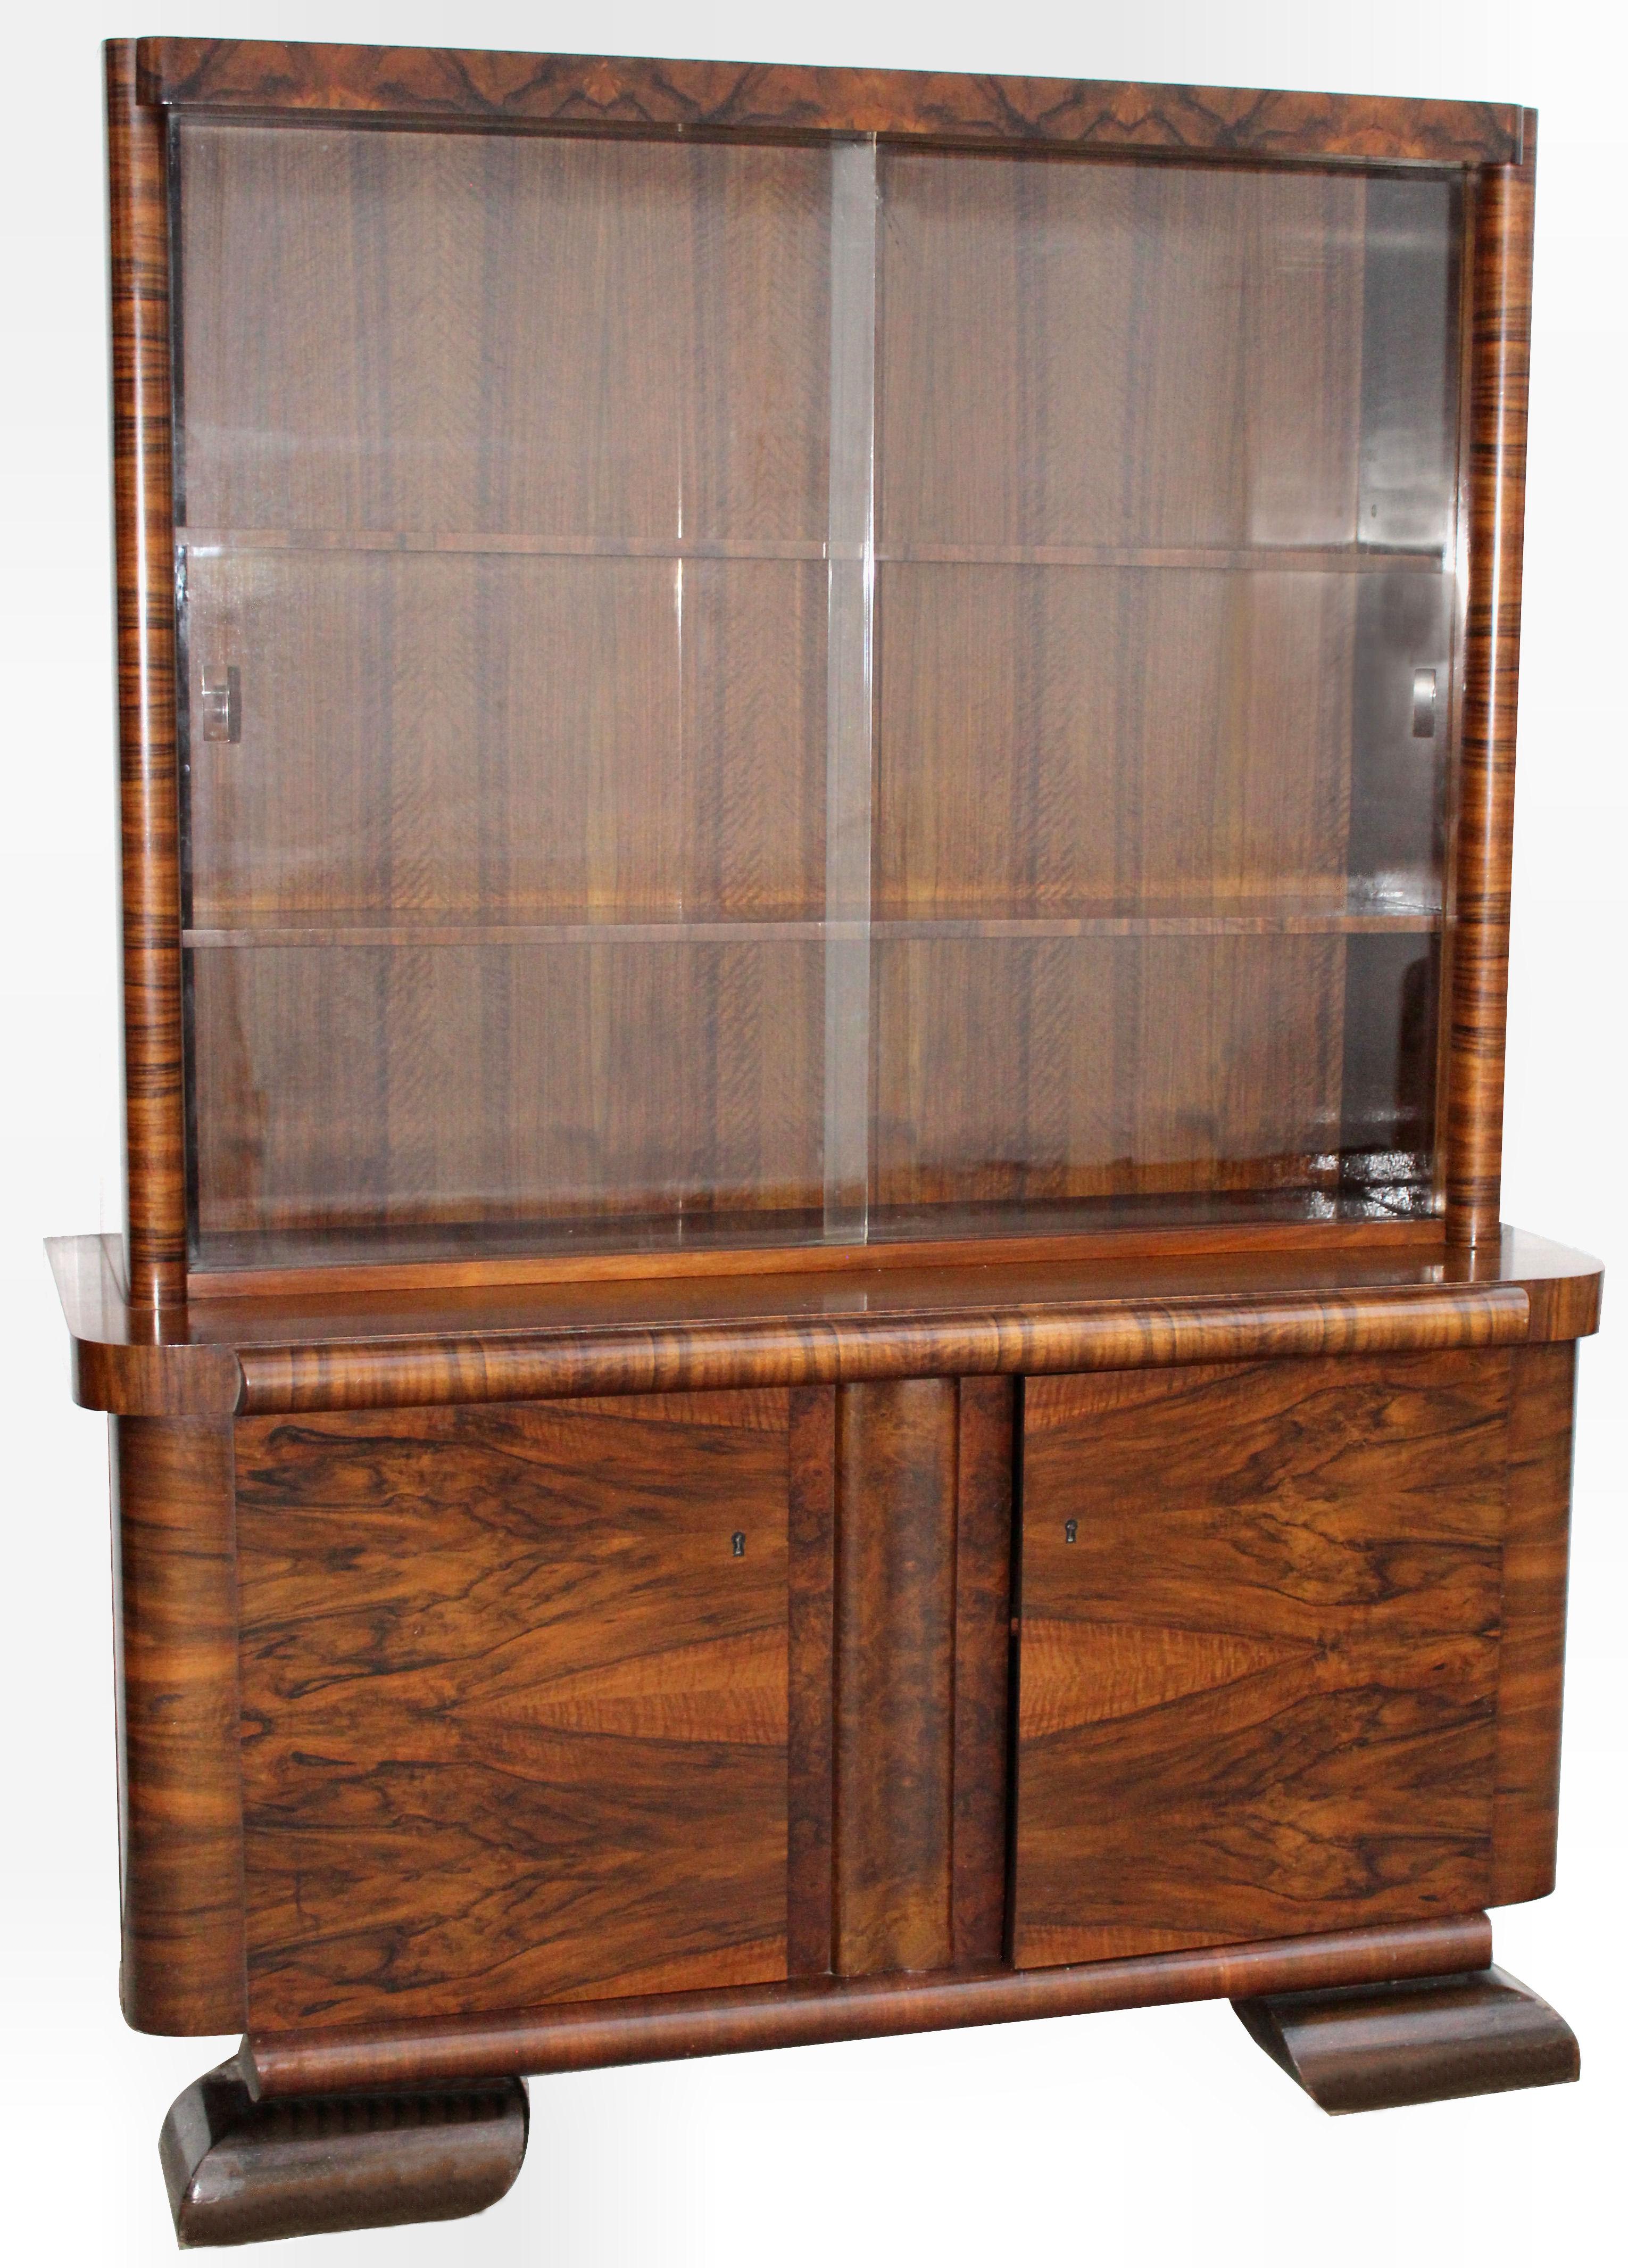 For your consideration is this very stylish 1930s Art Deco bookcase. Continental in origin, most likely German or Belgium. The two heavy glass sliding doors protect three generously sized shelves, offering plenty of space for either books or your